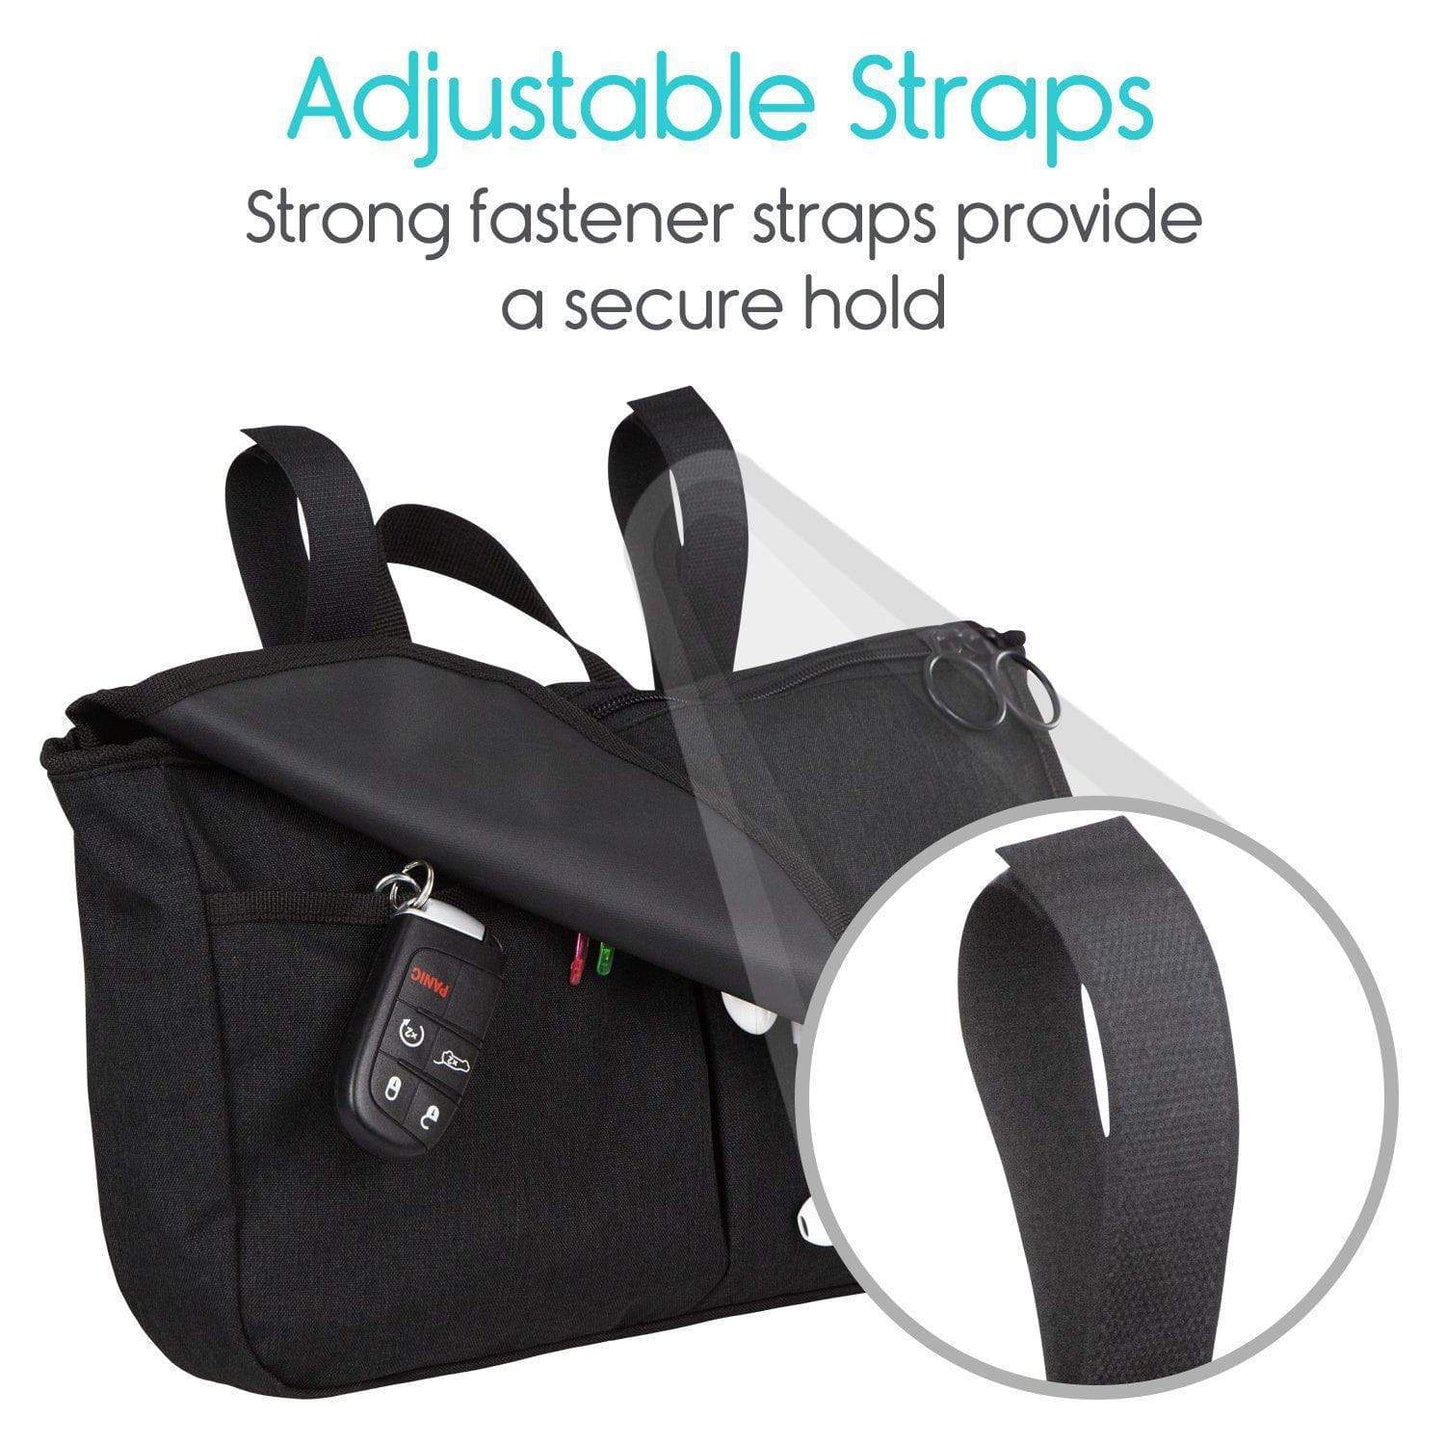 mobility side bag with adjustable strap highlighted from AskSAMIE